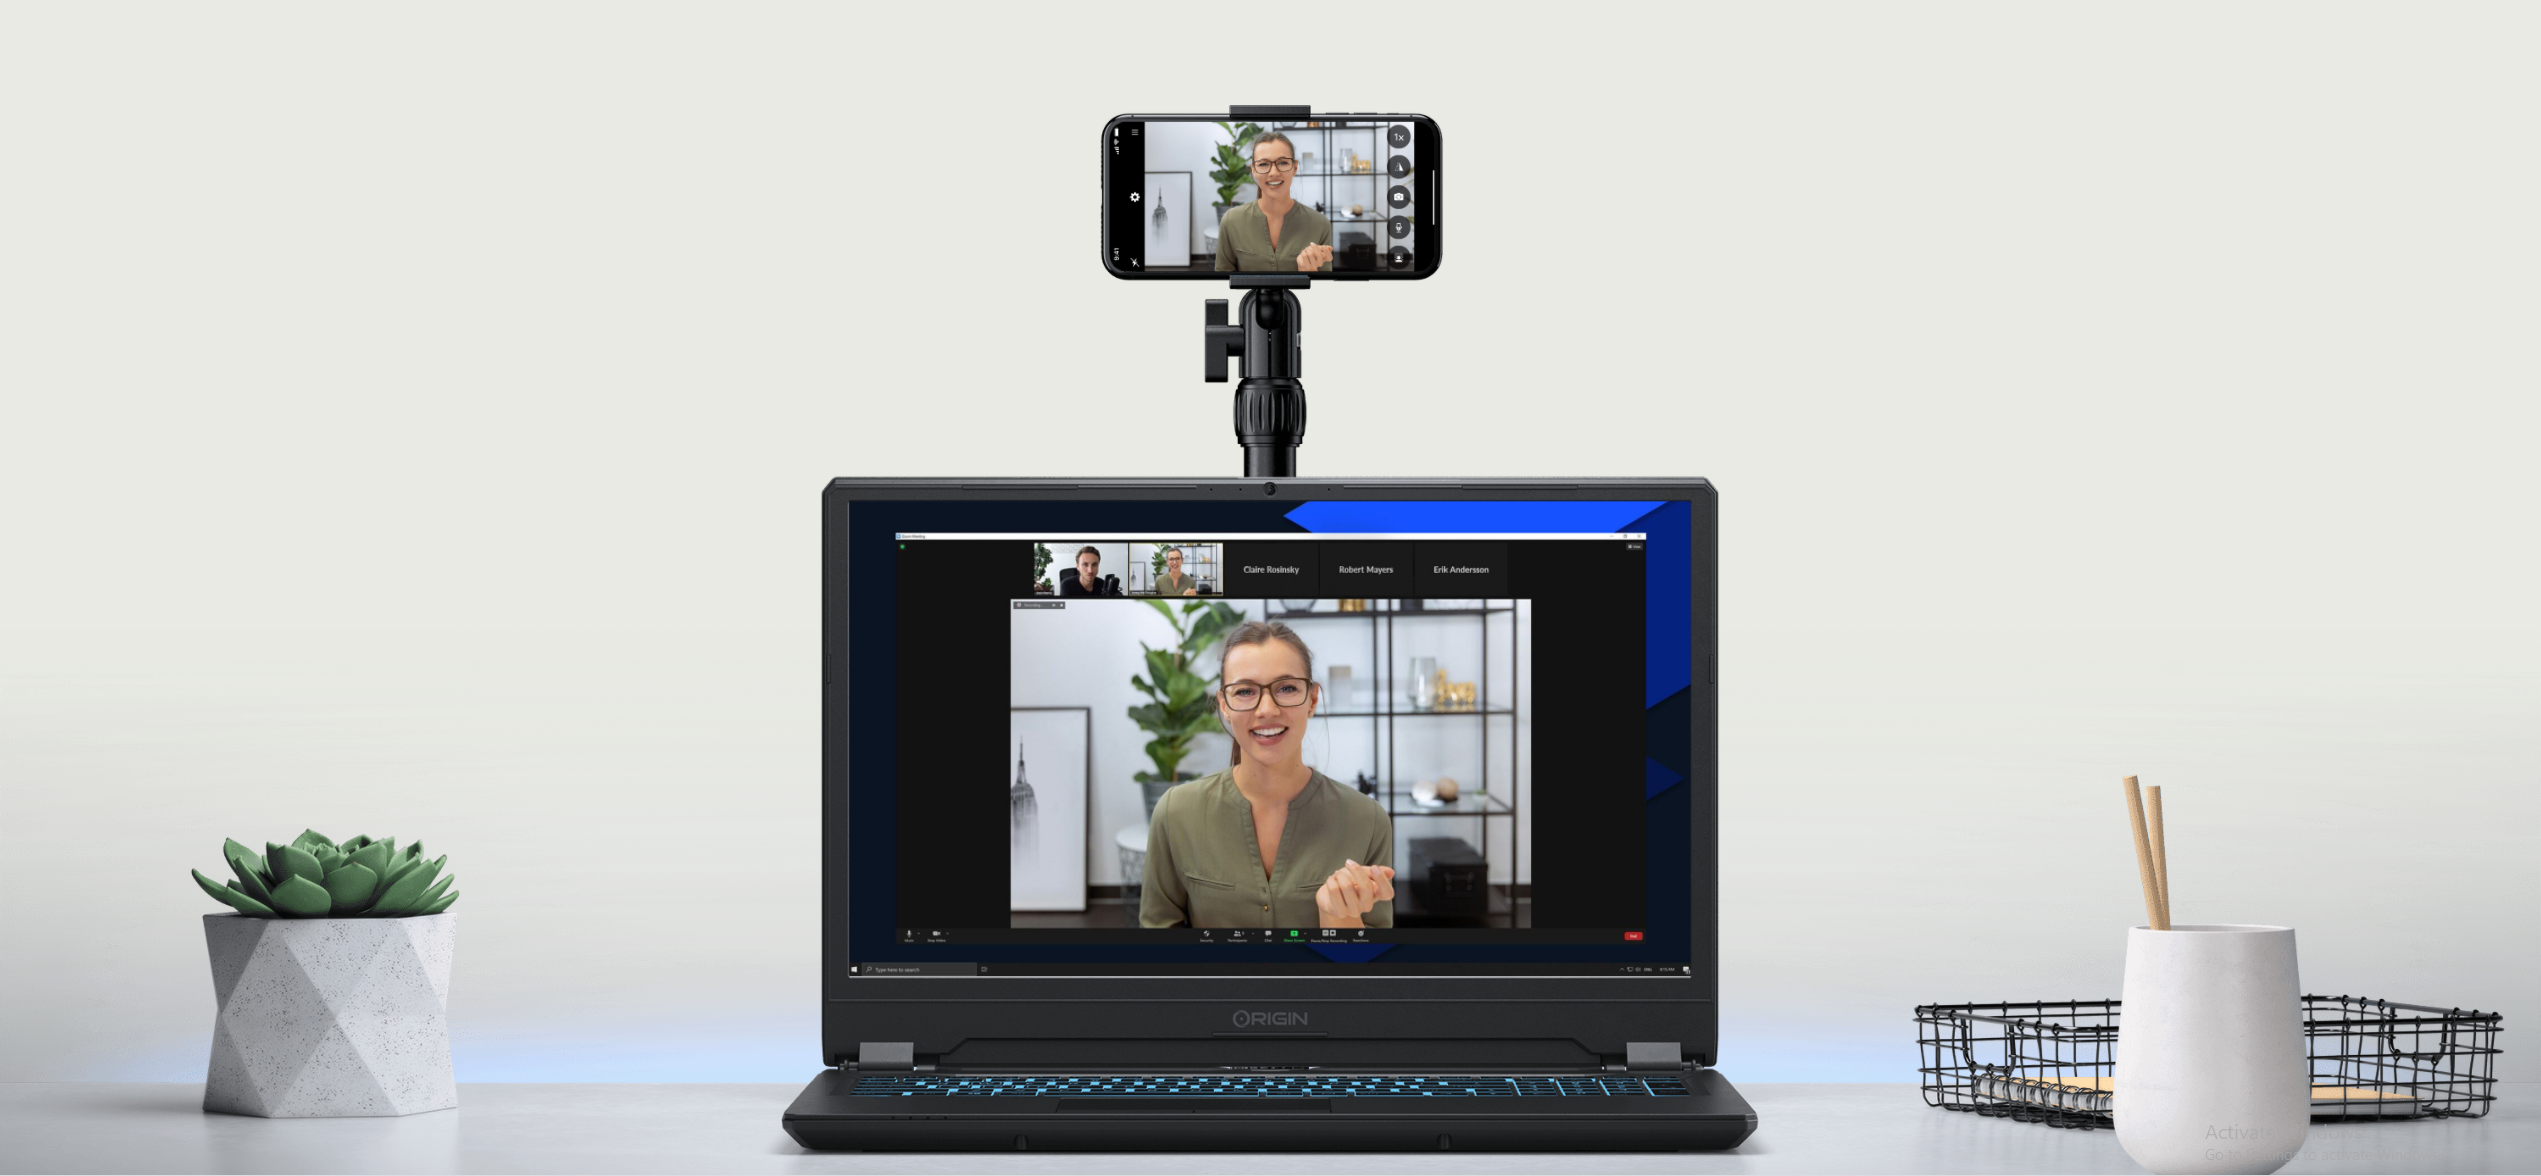 Turn Your Phone into a Webcam – CORSAIR Acquires EpocCam